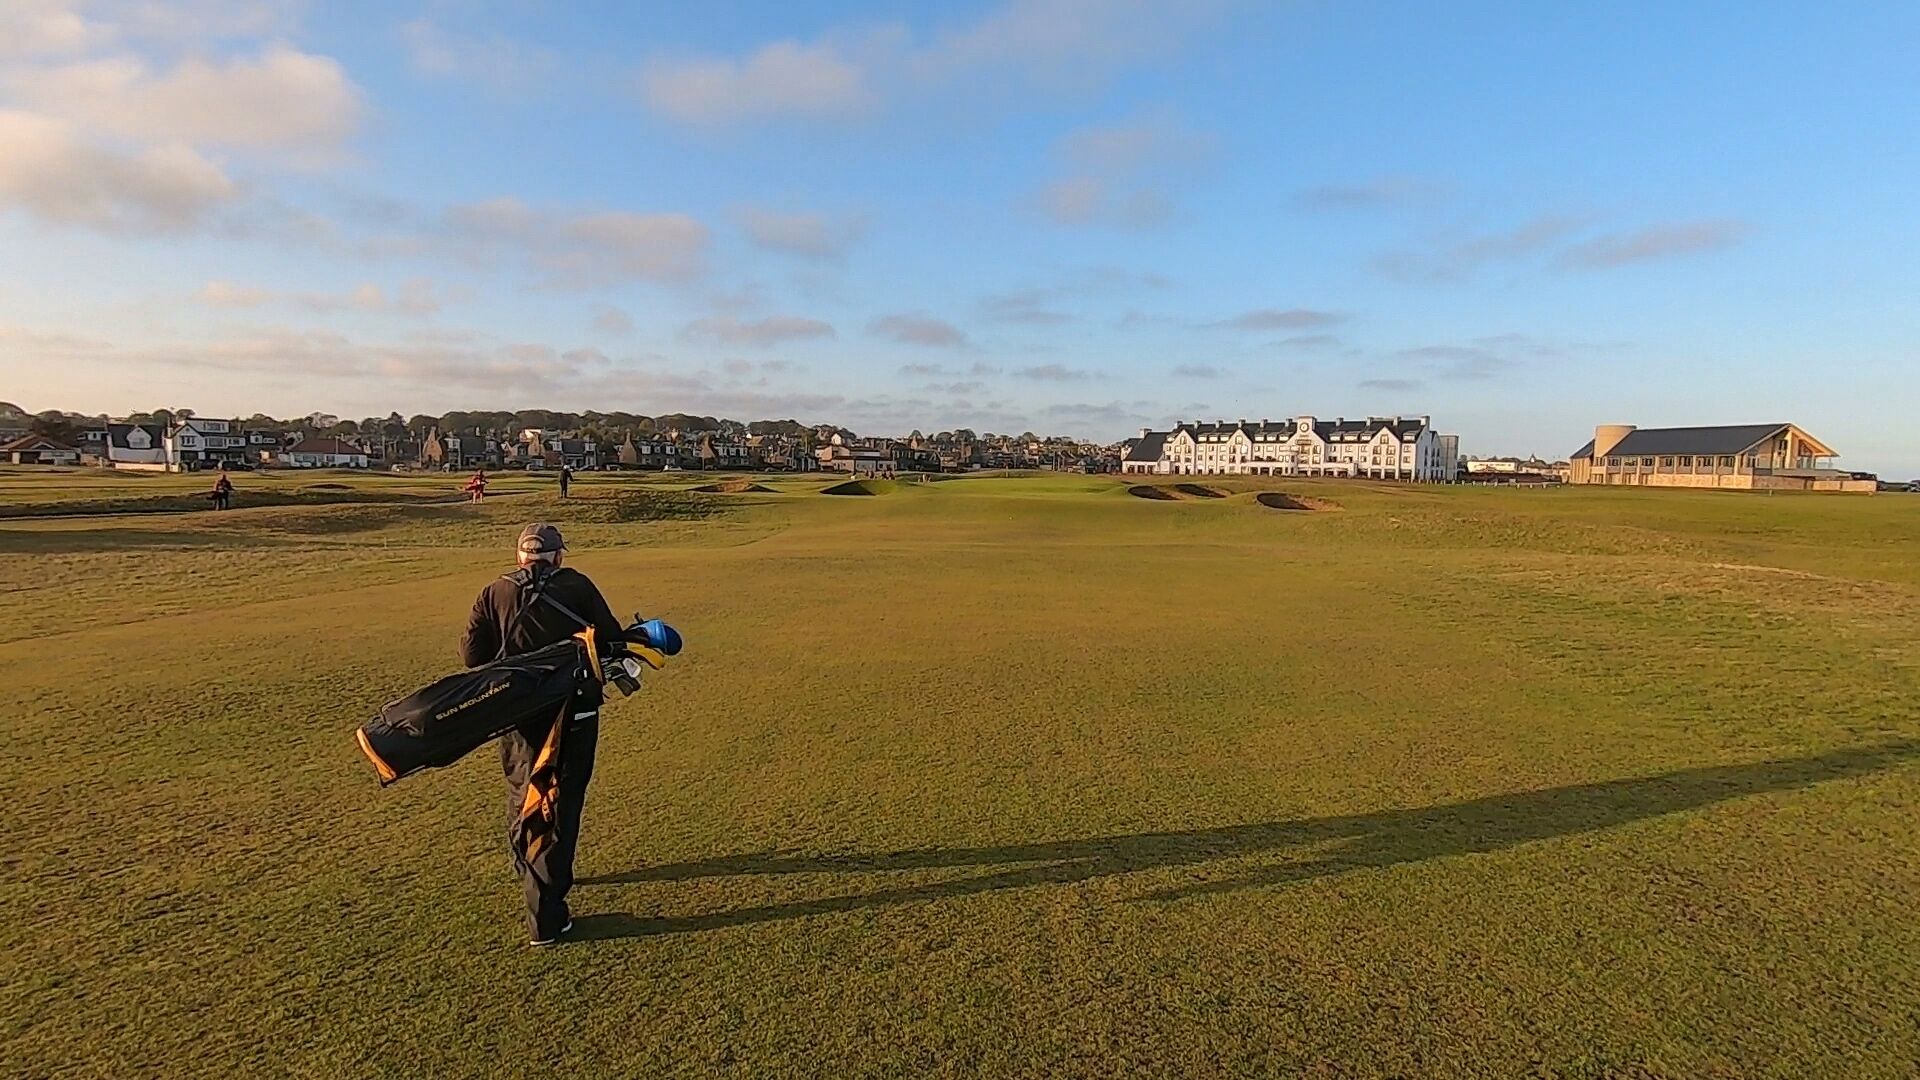 A postcard from Carnoustie